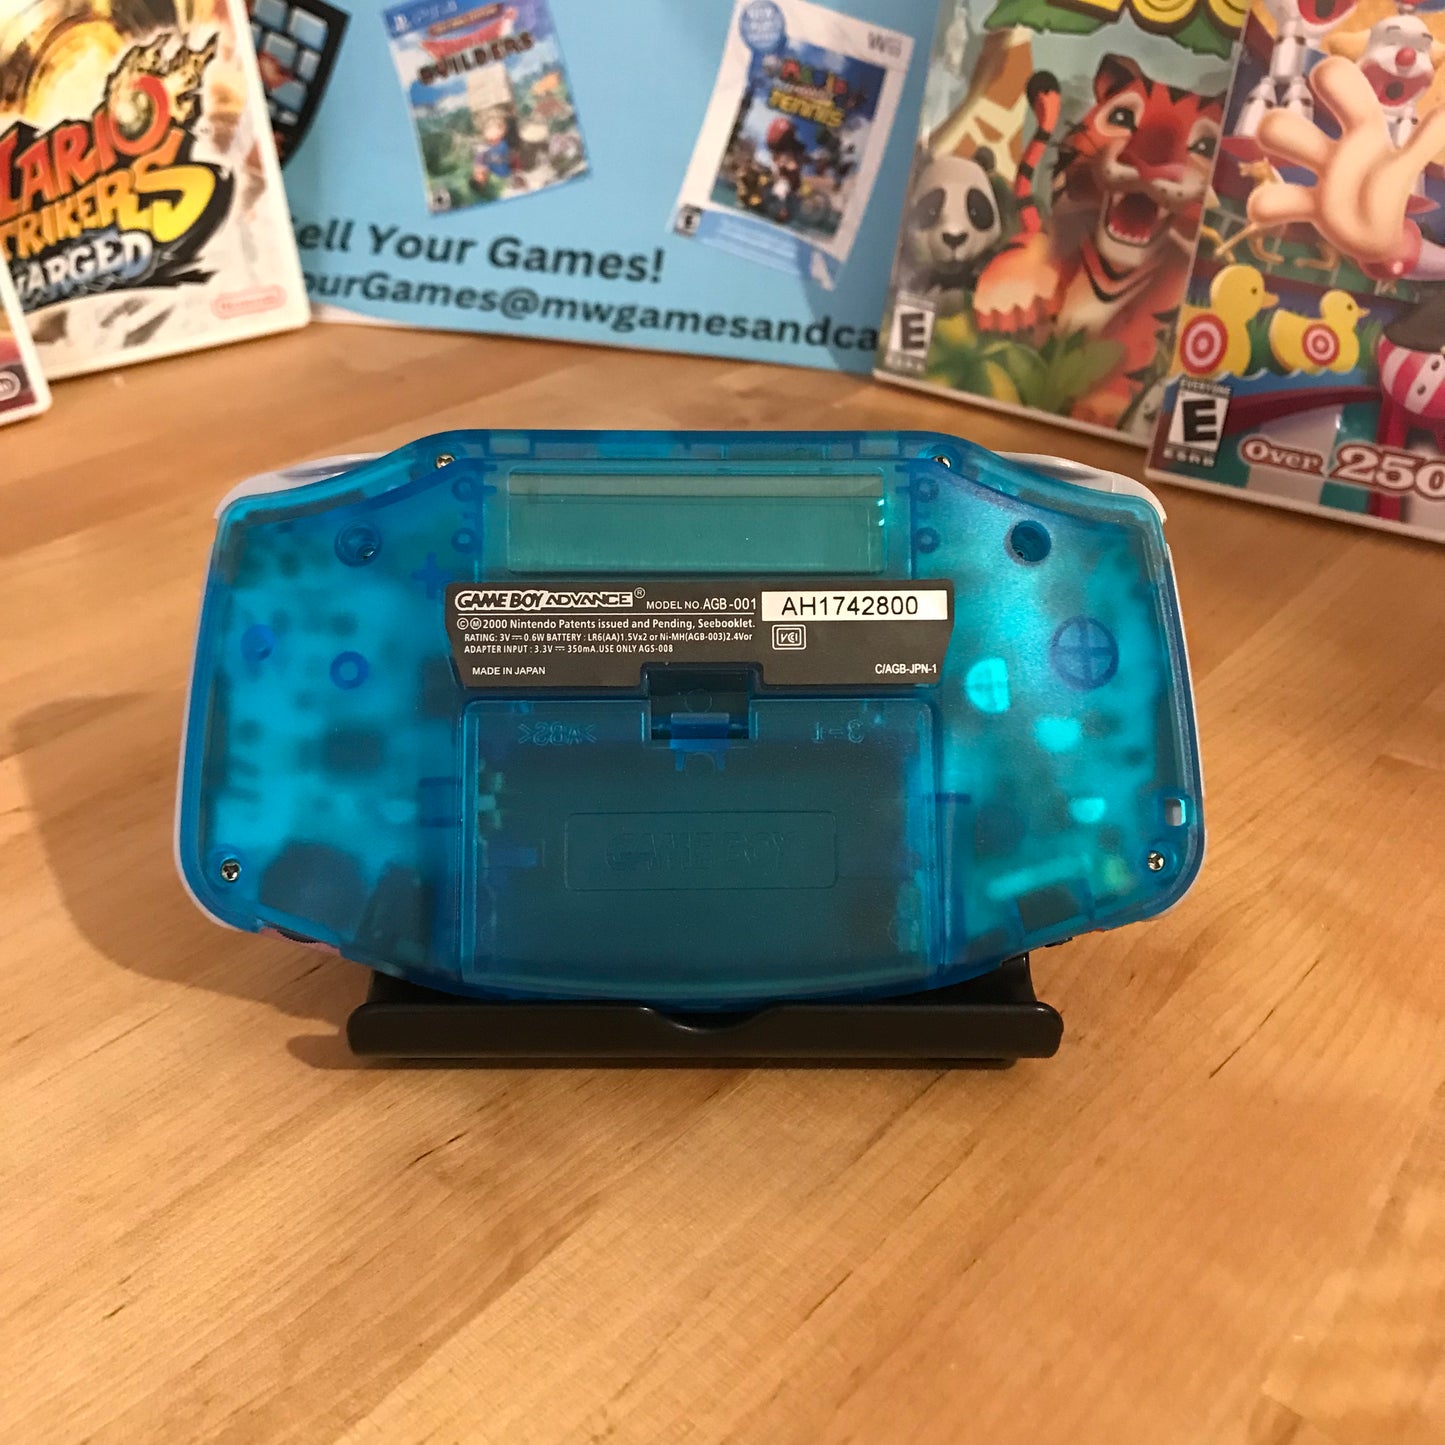 Upgraded Nintendo Gameboy Advance System In Clear Blue/Pink - Good